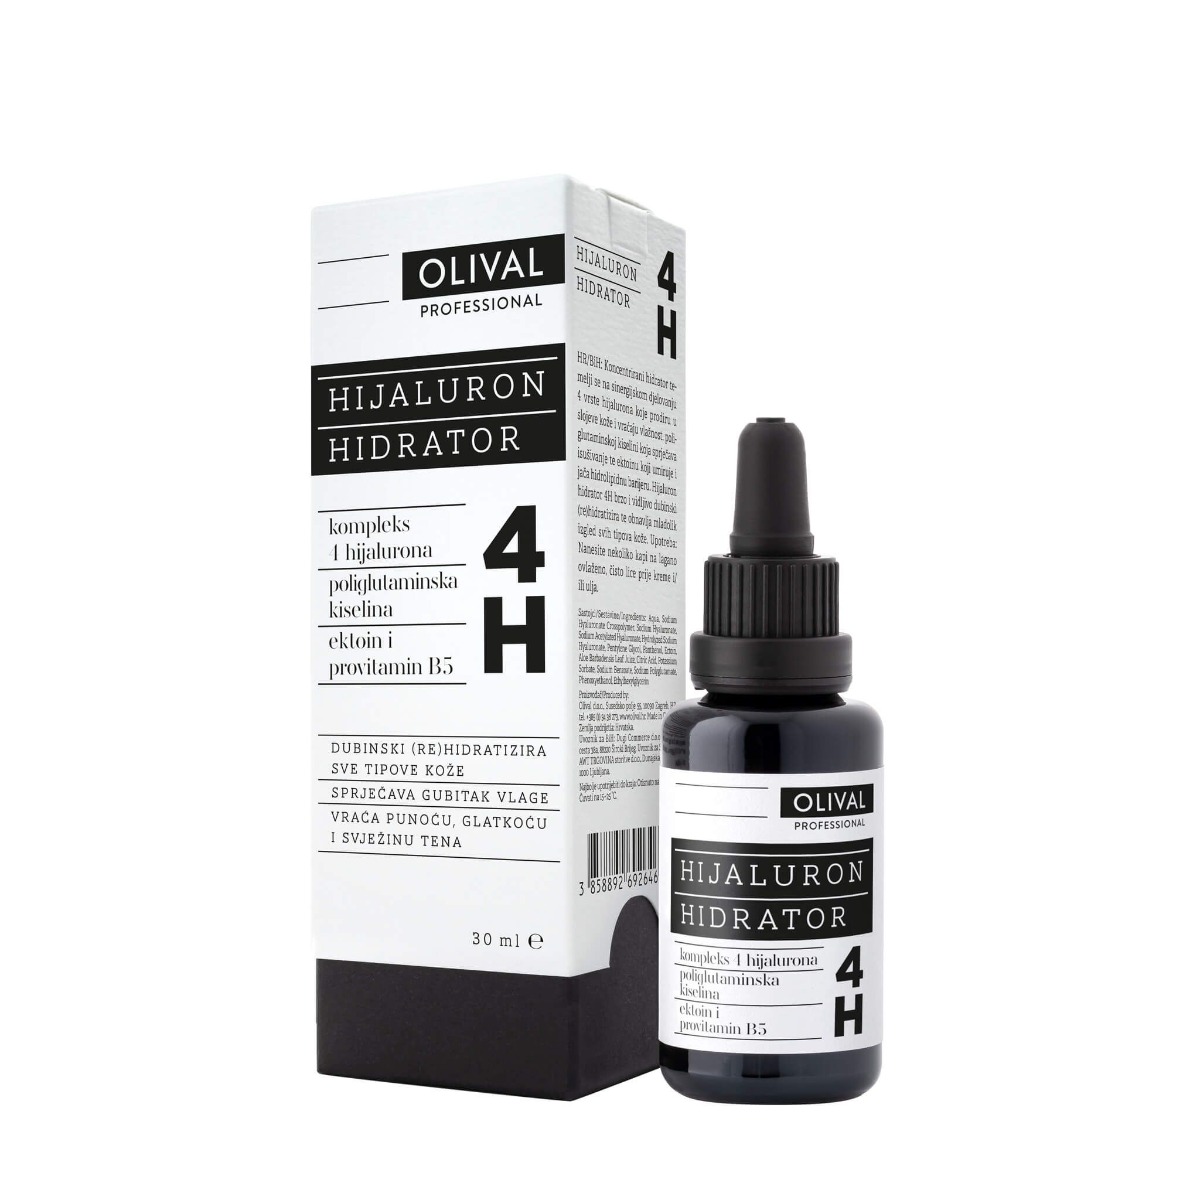 Olival Professional Hyaluron Hydrator 4H 30 ml Olival